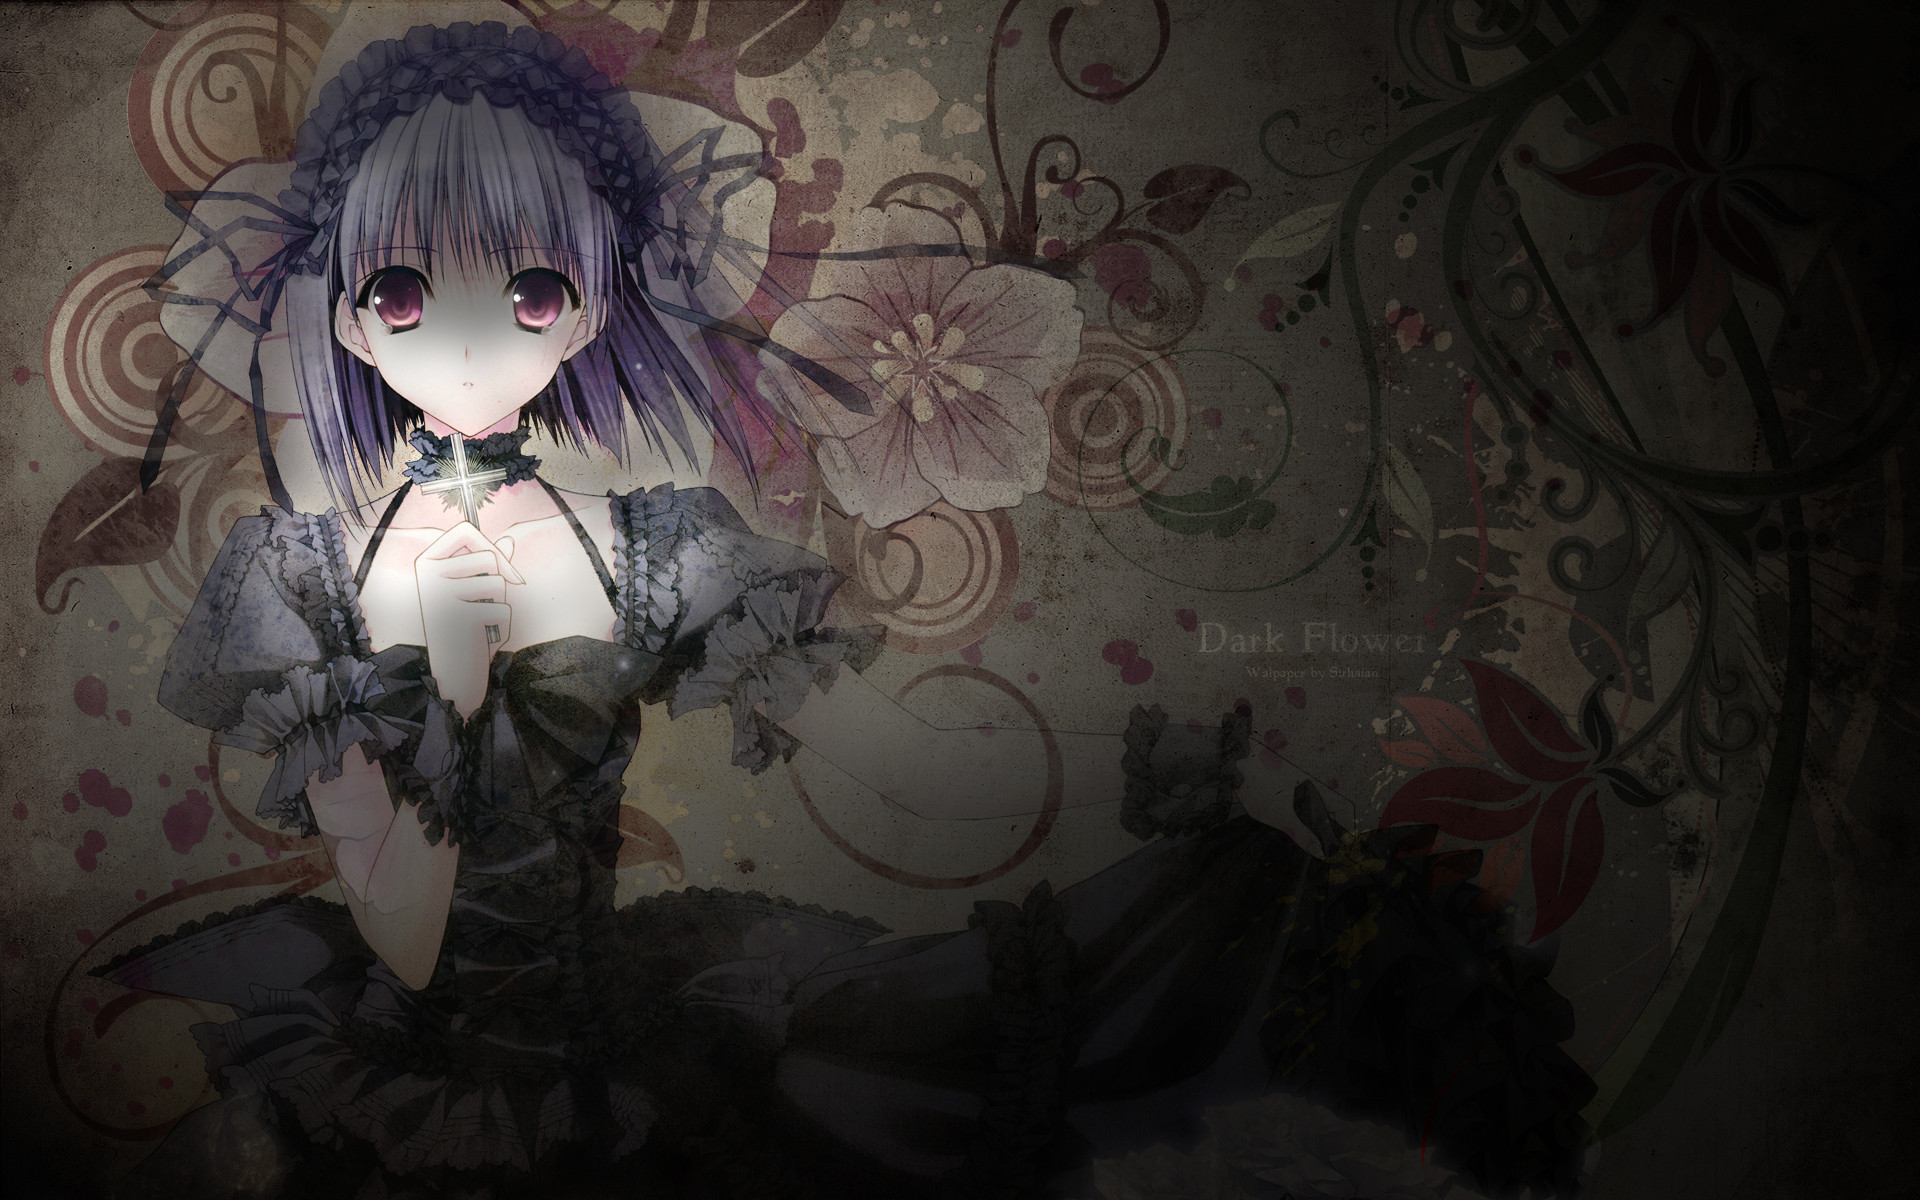 Anime Gothic Girl Wallpapers - iXpap